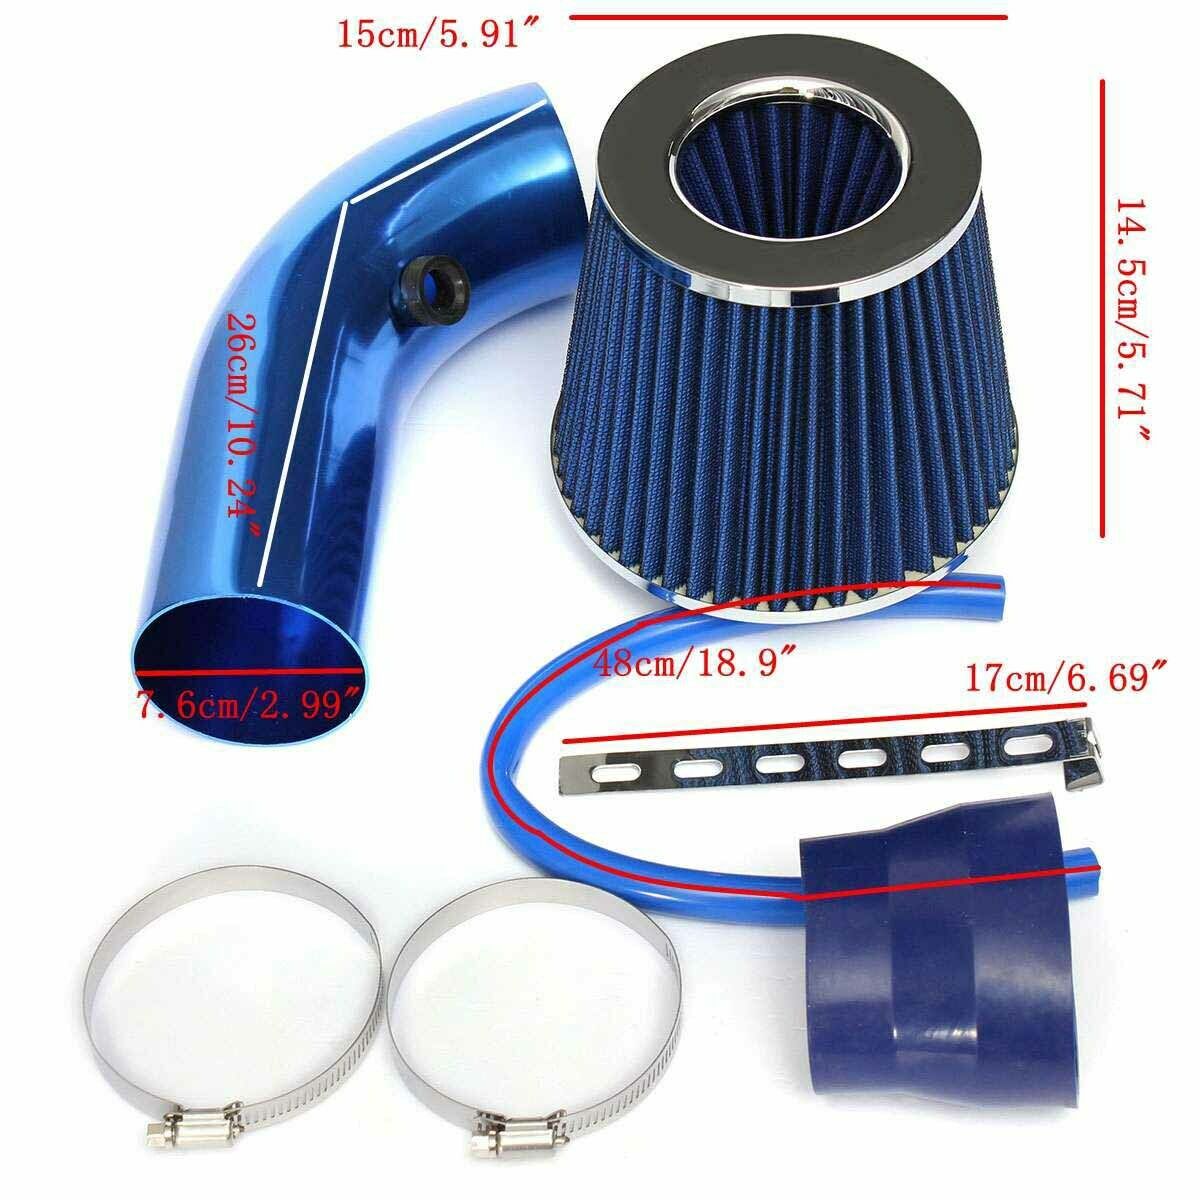 Universal 3'' Car Cold Air Intake Filter Alumimum Induction Kit Pipe Hose System